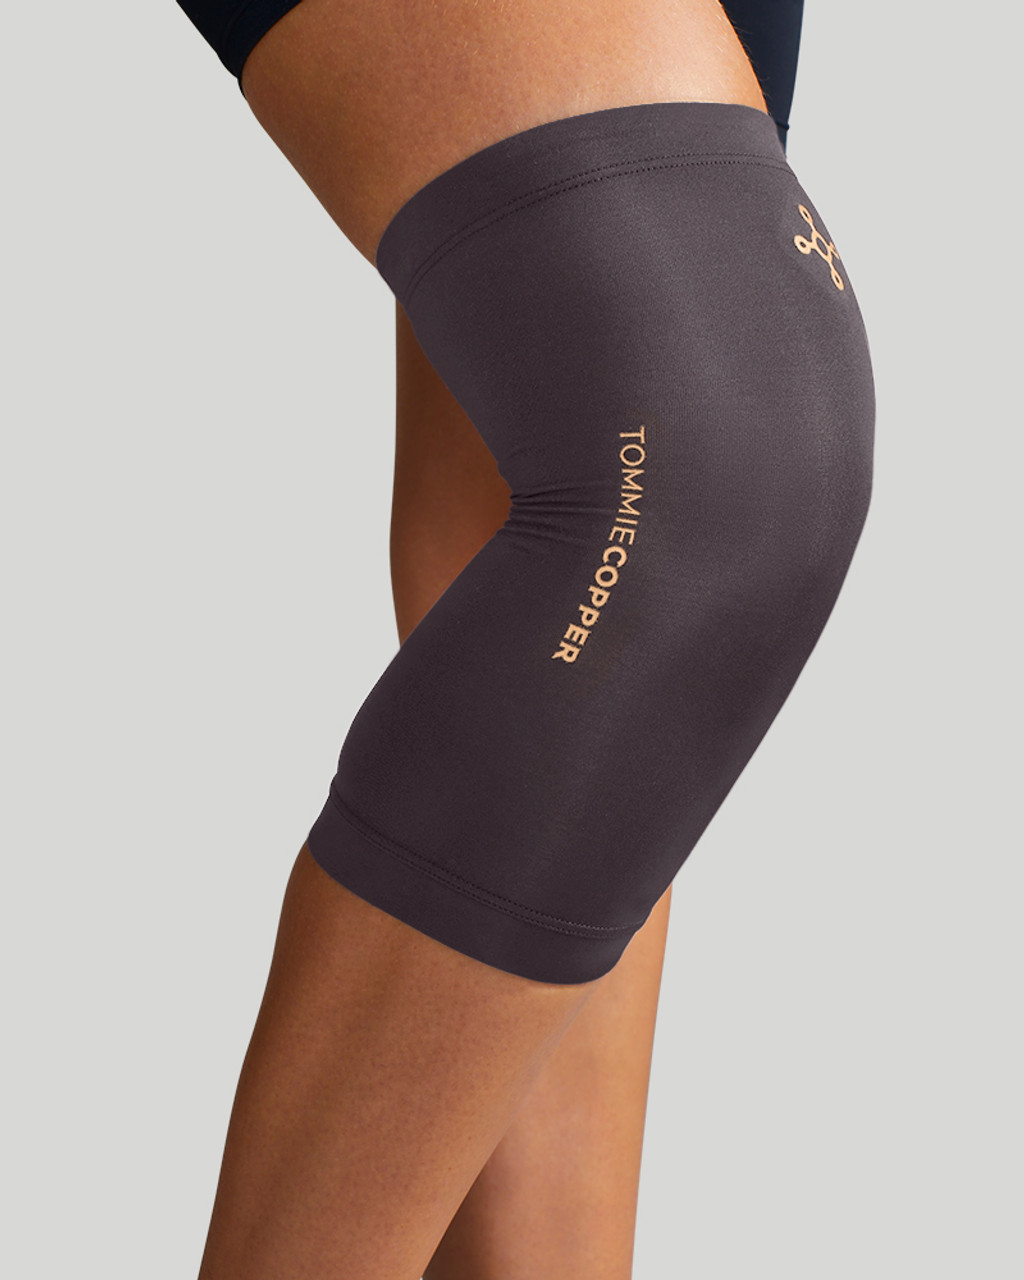 Buy the Tommie Copper® Women's Core Compression Knee Sleeve